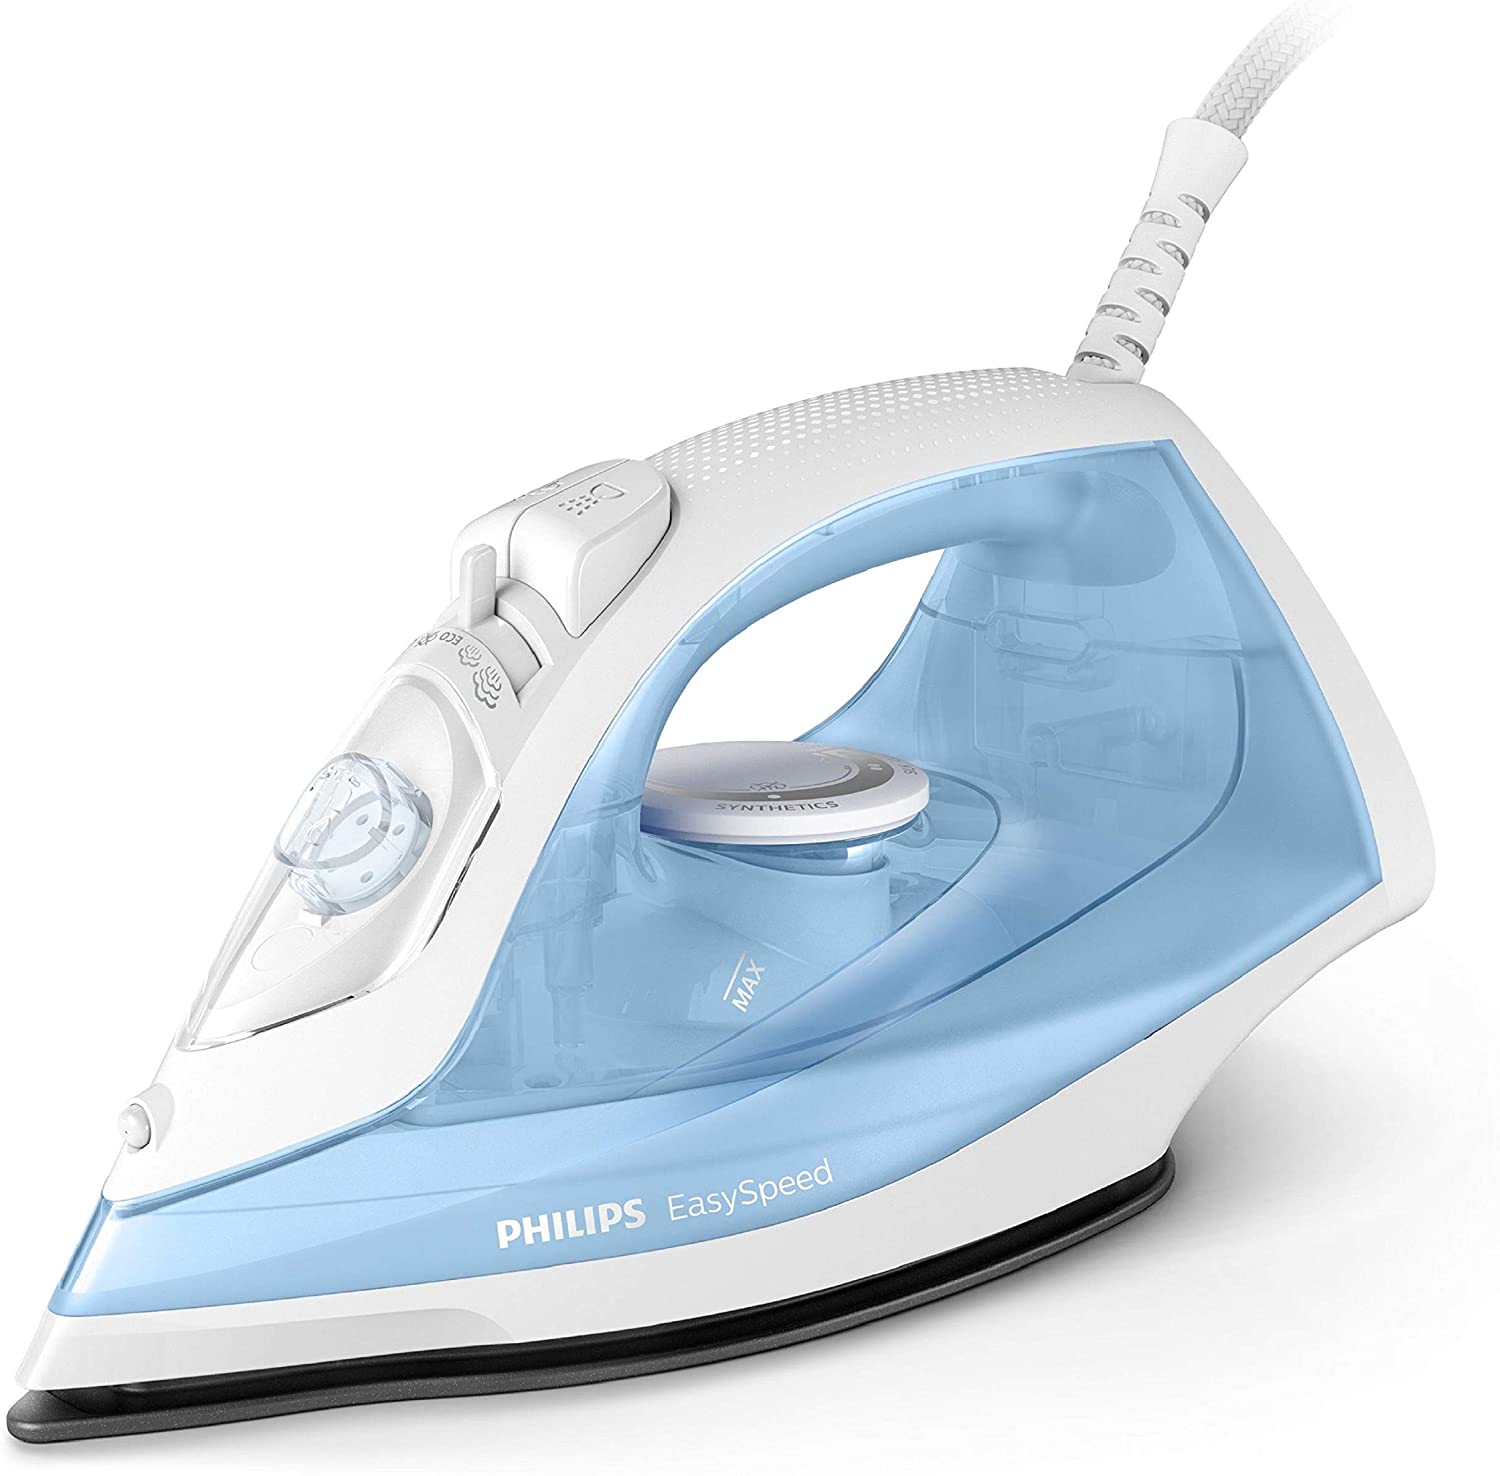 Philips Easy Speed Steam Iron Light Blue - GC1738 | reliable performance | lightweight | variable steam settings | safety features | stylish | even heat distribution | Halabh.com